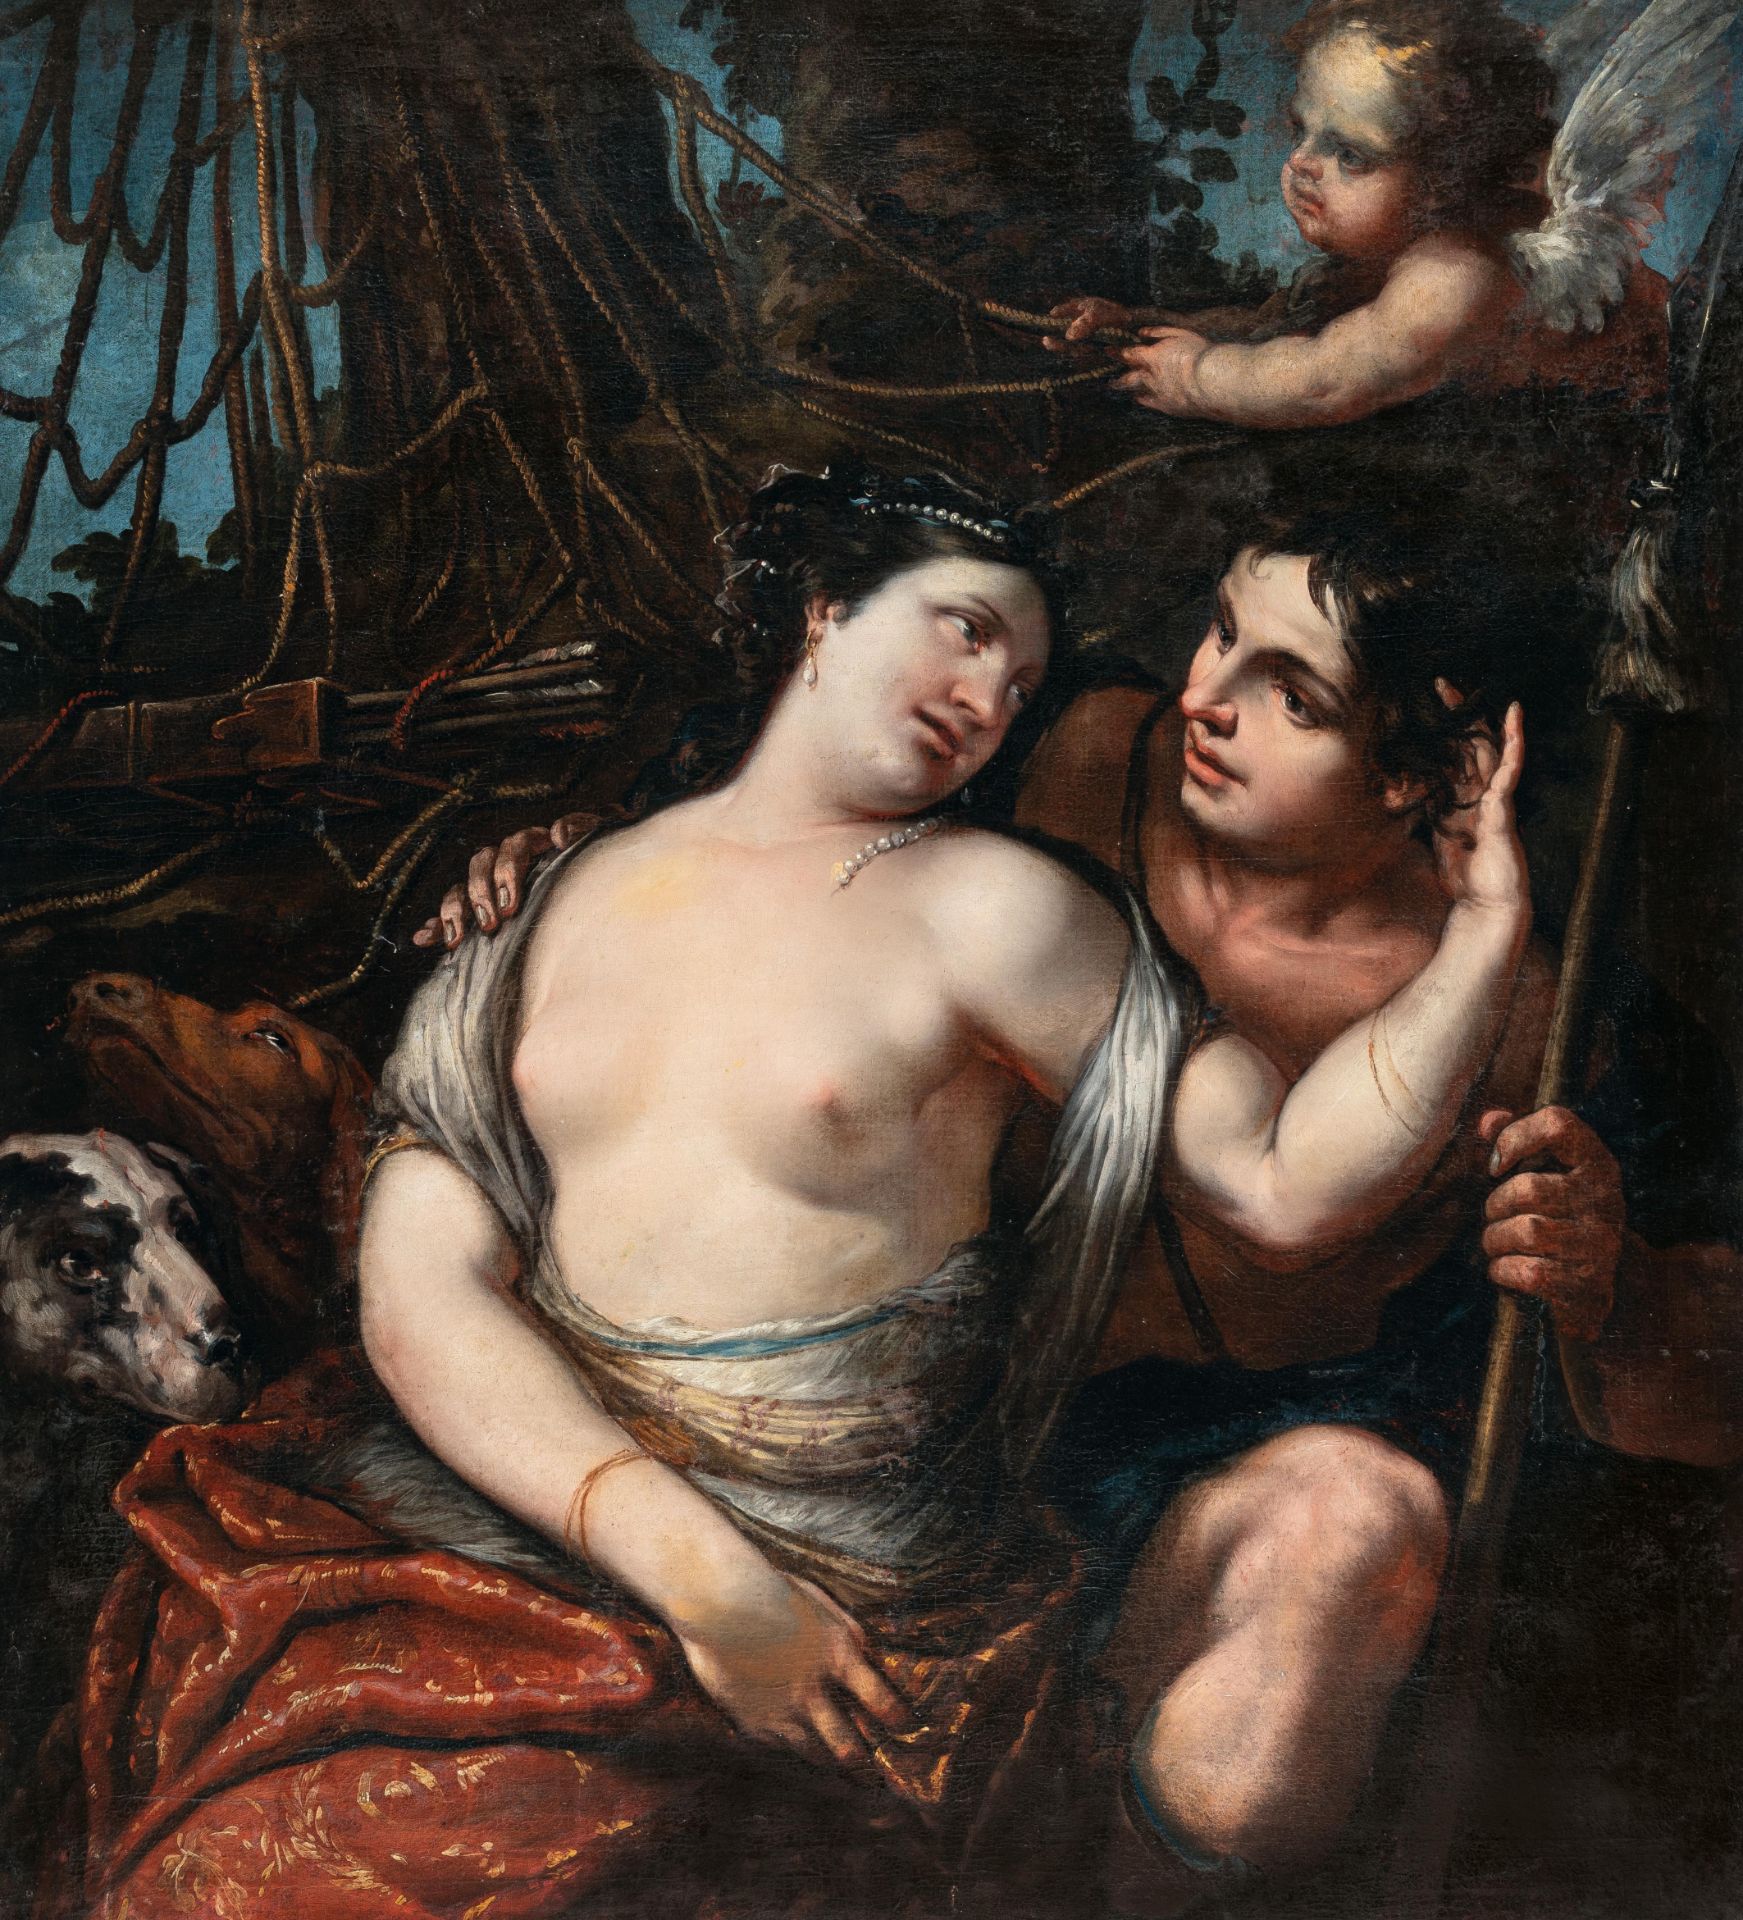 Tuscan – Venus and Adonis.Oil on canvas, relined. (c. 1640/50). 105.6 x 96.8 cm. Framed.Taxation: